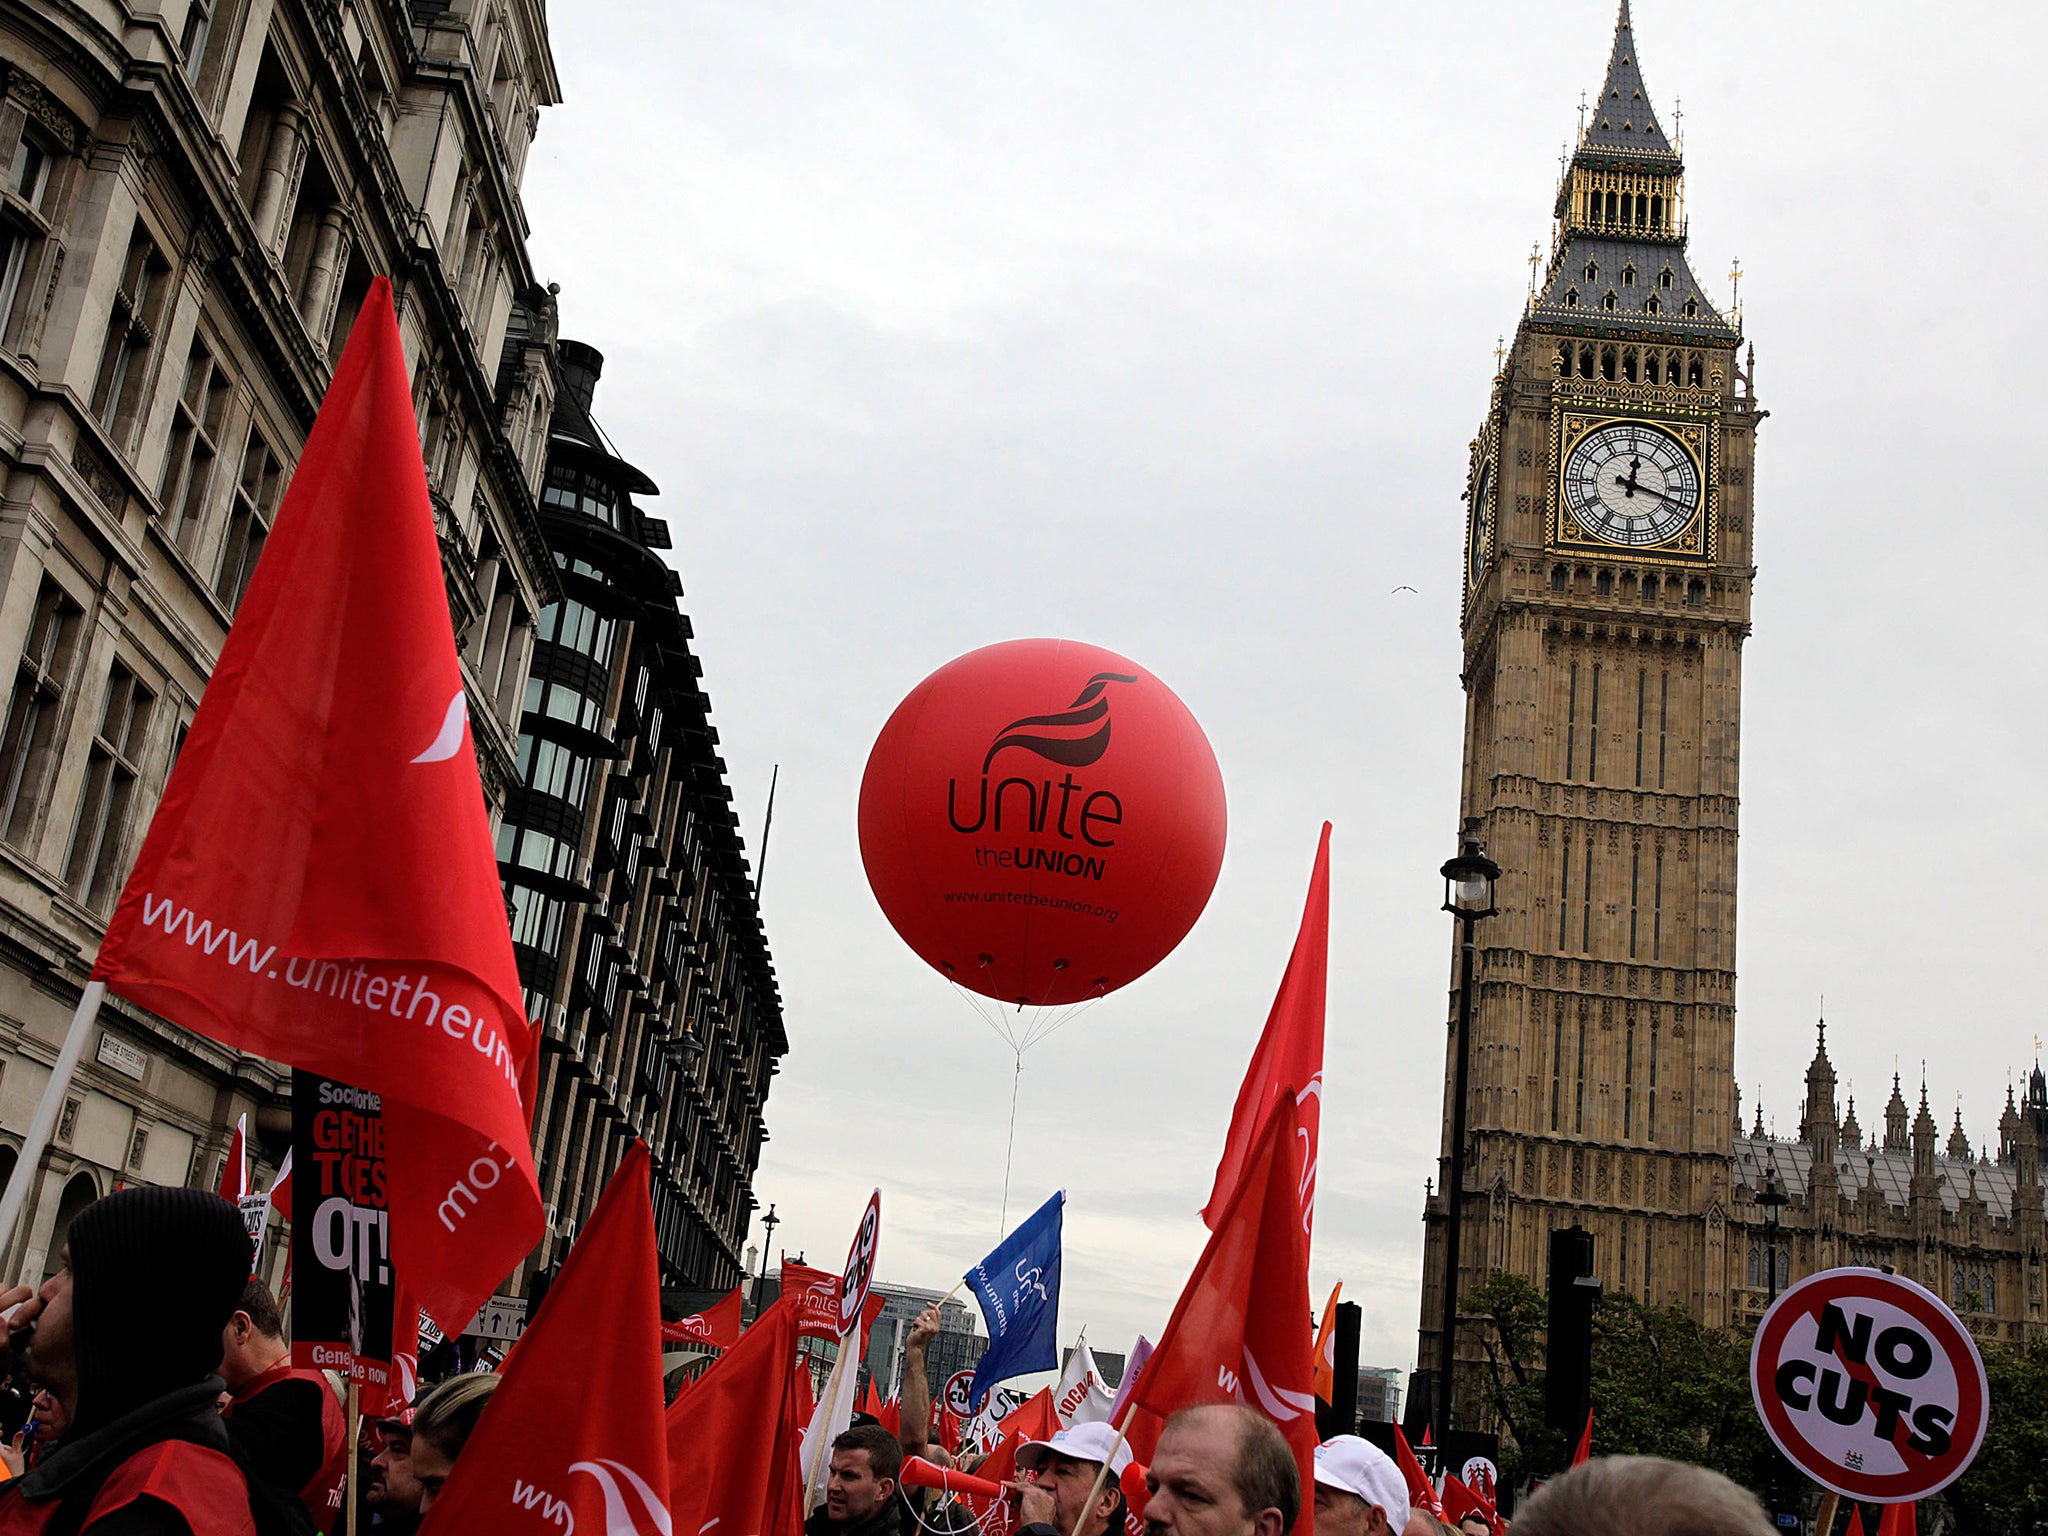 Unite, Britain’s biggest union, sacked a member of its staff who was being subjected to sexist bullying